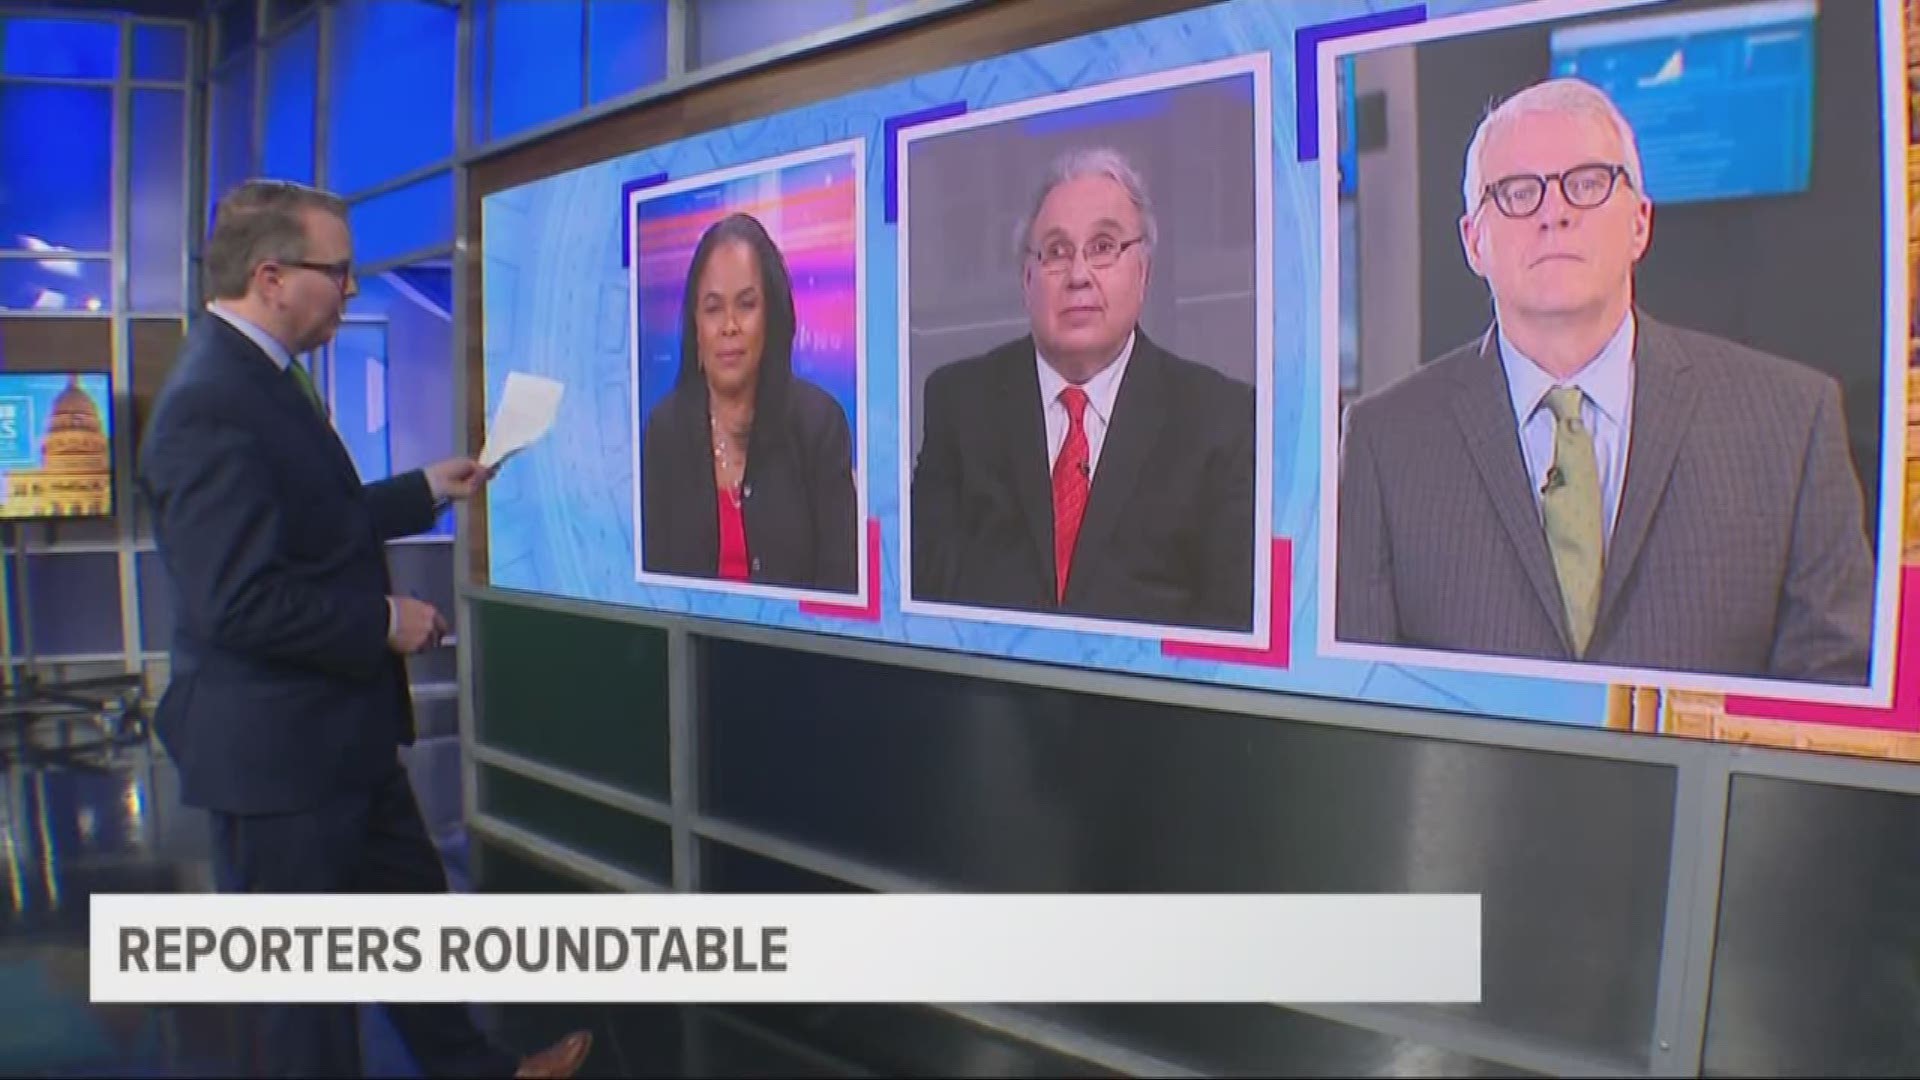 Ross Ramsey, Bud Kennedy, and Berna Dean Steptoe, WFAA's political producer, joined Jason Whitely to discuss a tough week for two Democrats running for U.S. Senate.